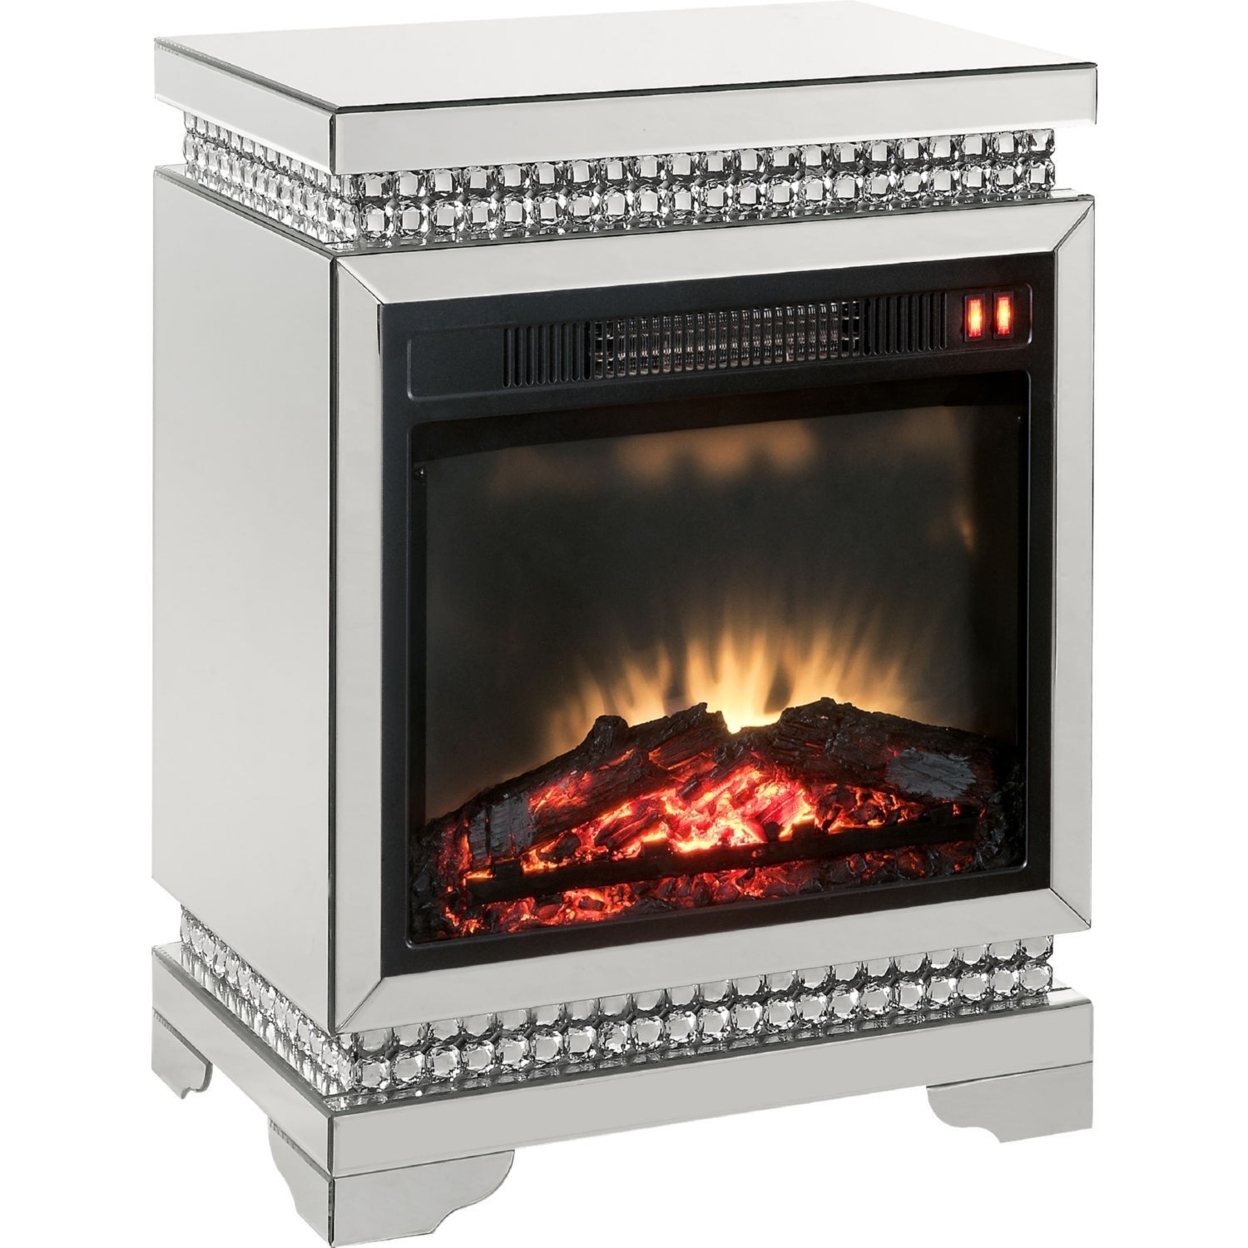 Su 30 Inch Electric Fireplace, Square, Mirror Panel Framing And Faux Diamonds, Silver